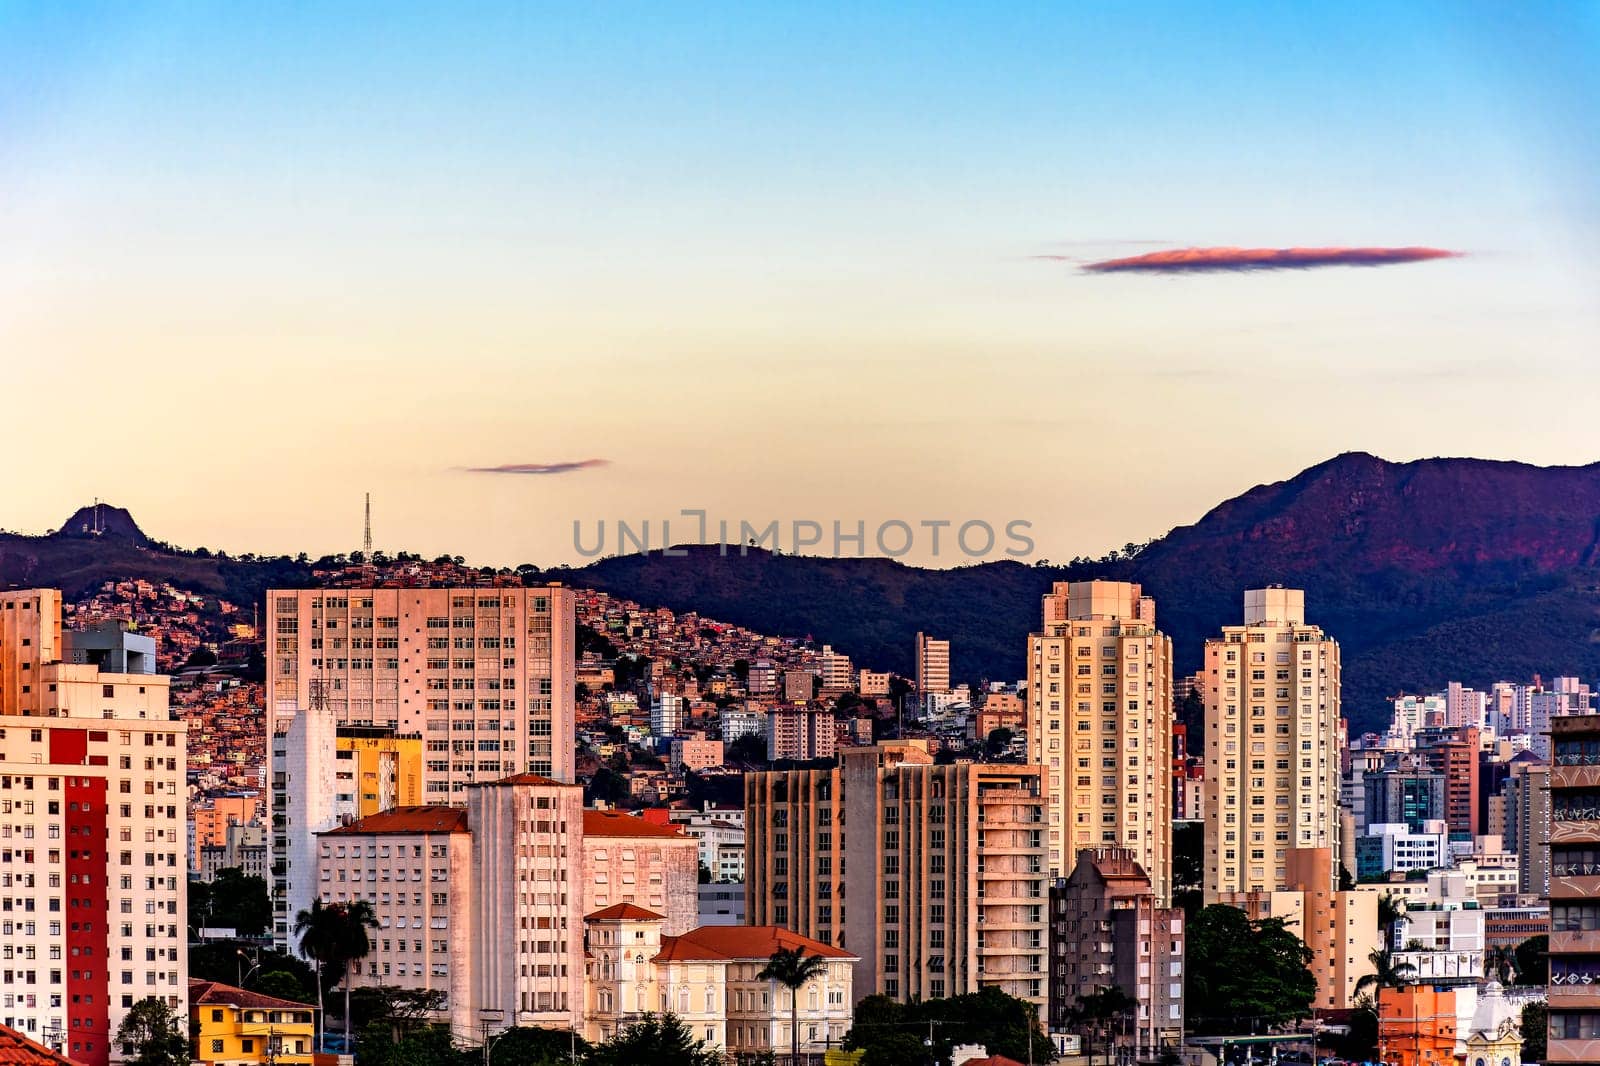 City of Belo Horizonte in the state of Minas Gerais by Fred_Pinheiro